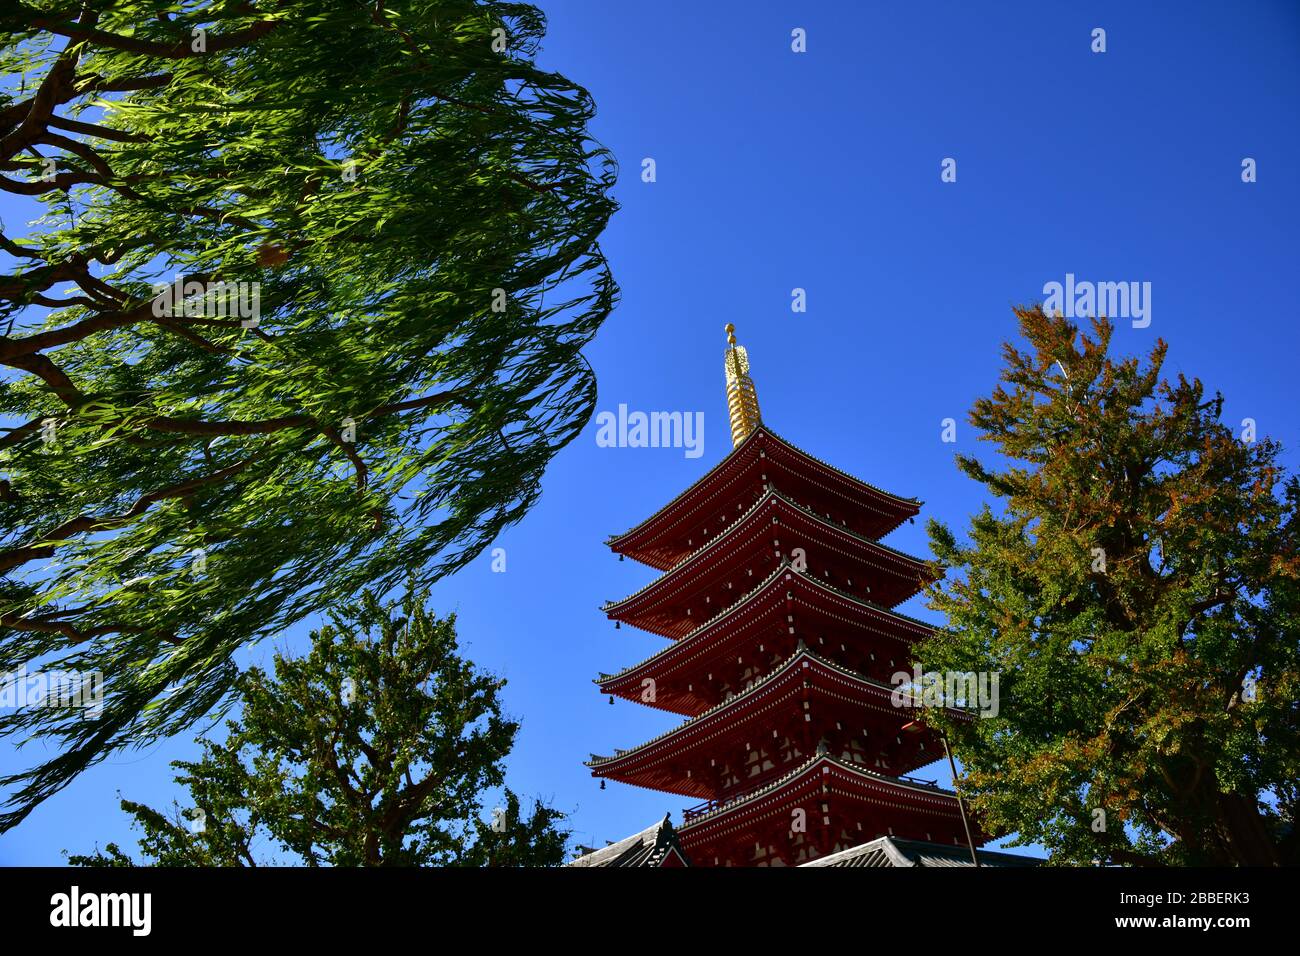 Low angle view between green leafy trees of the pagoda next to the Sensoji Temple in Tokyo Japan Stock Photo